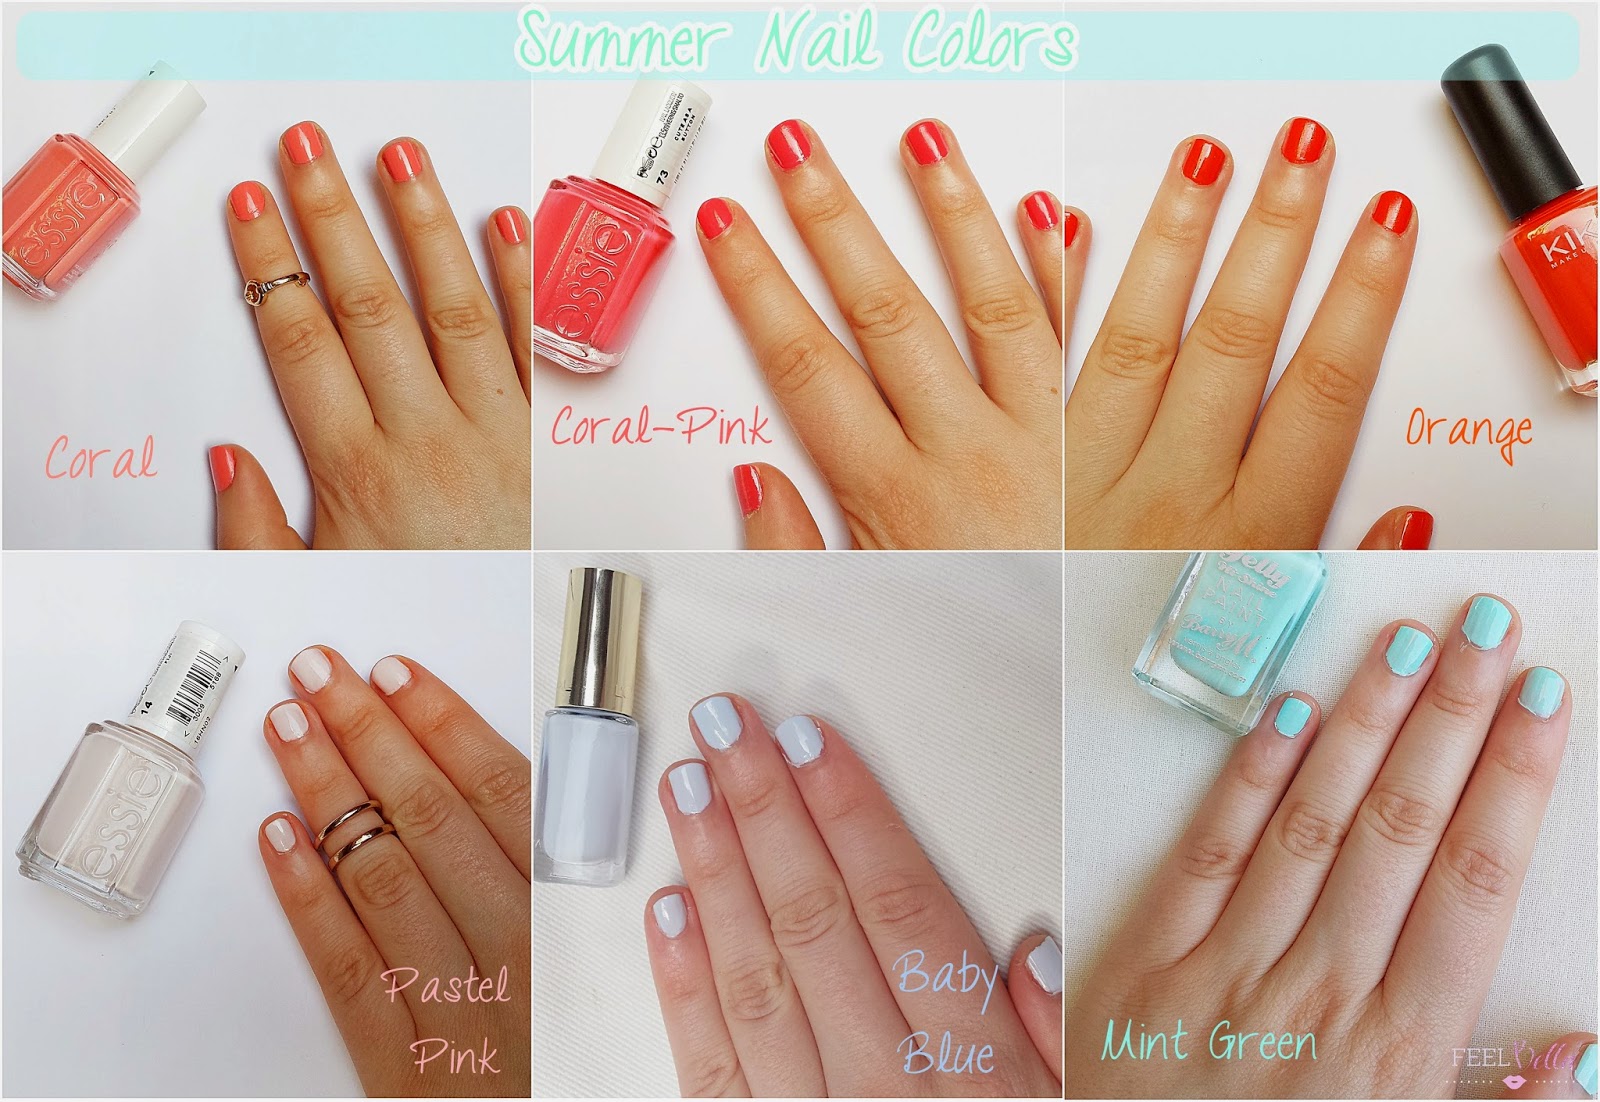 Summer Nail Colors for Short Nails - wide 7